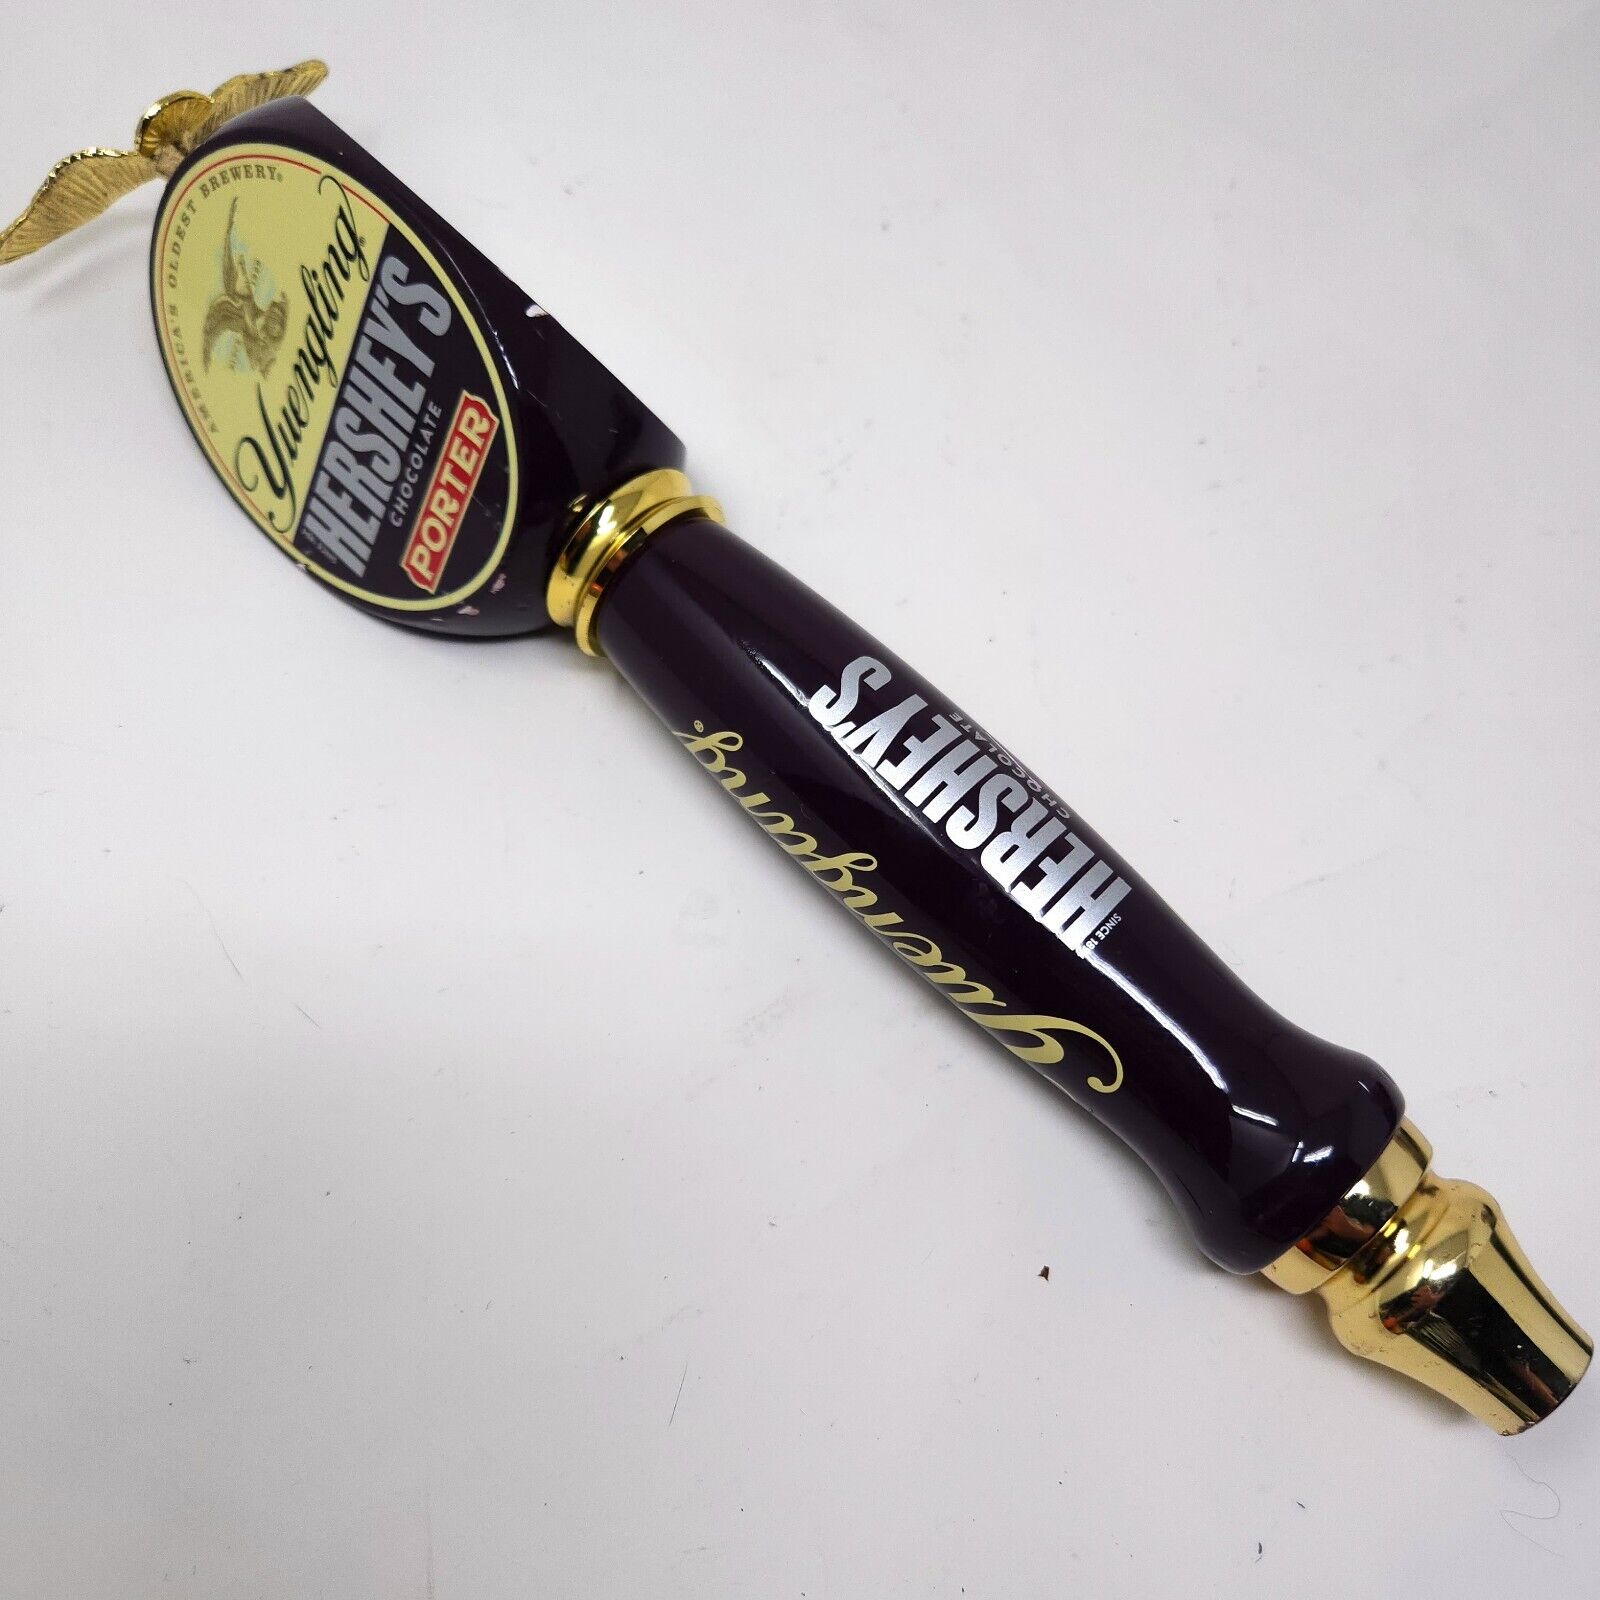 Yuengling Hershey’s Chocolate Porter Beer Tap Handle 13” Tall Keg Mancave Pub 3D